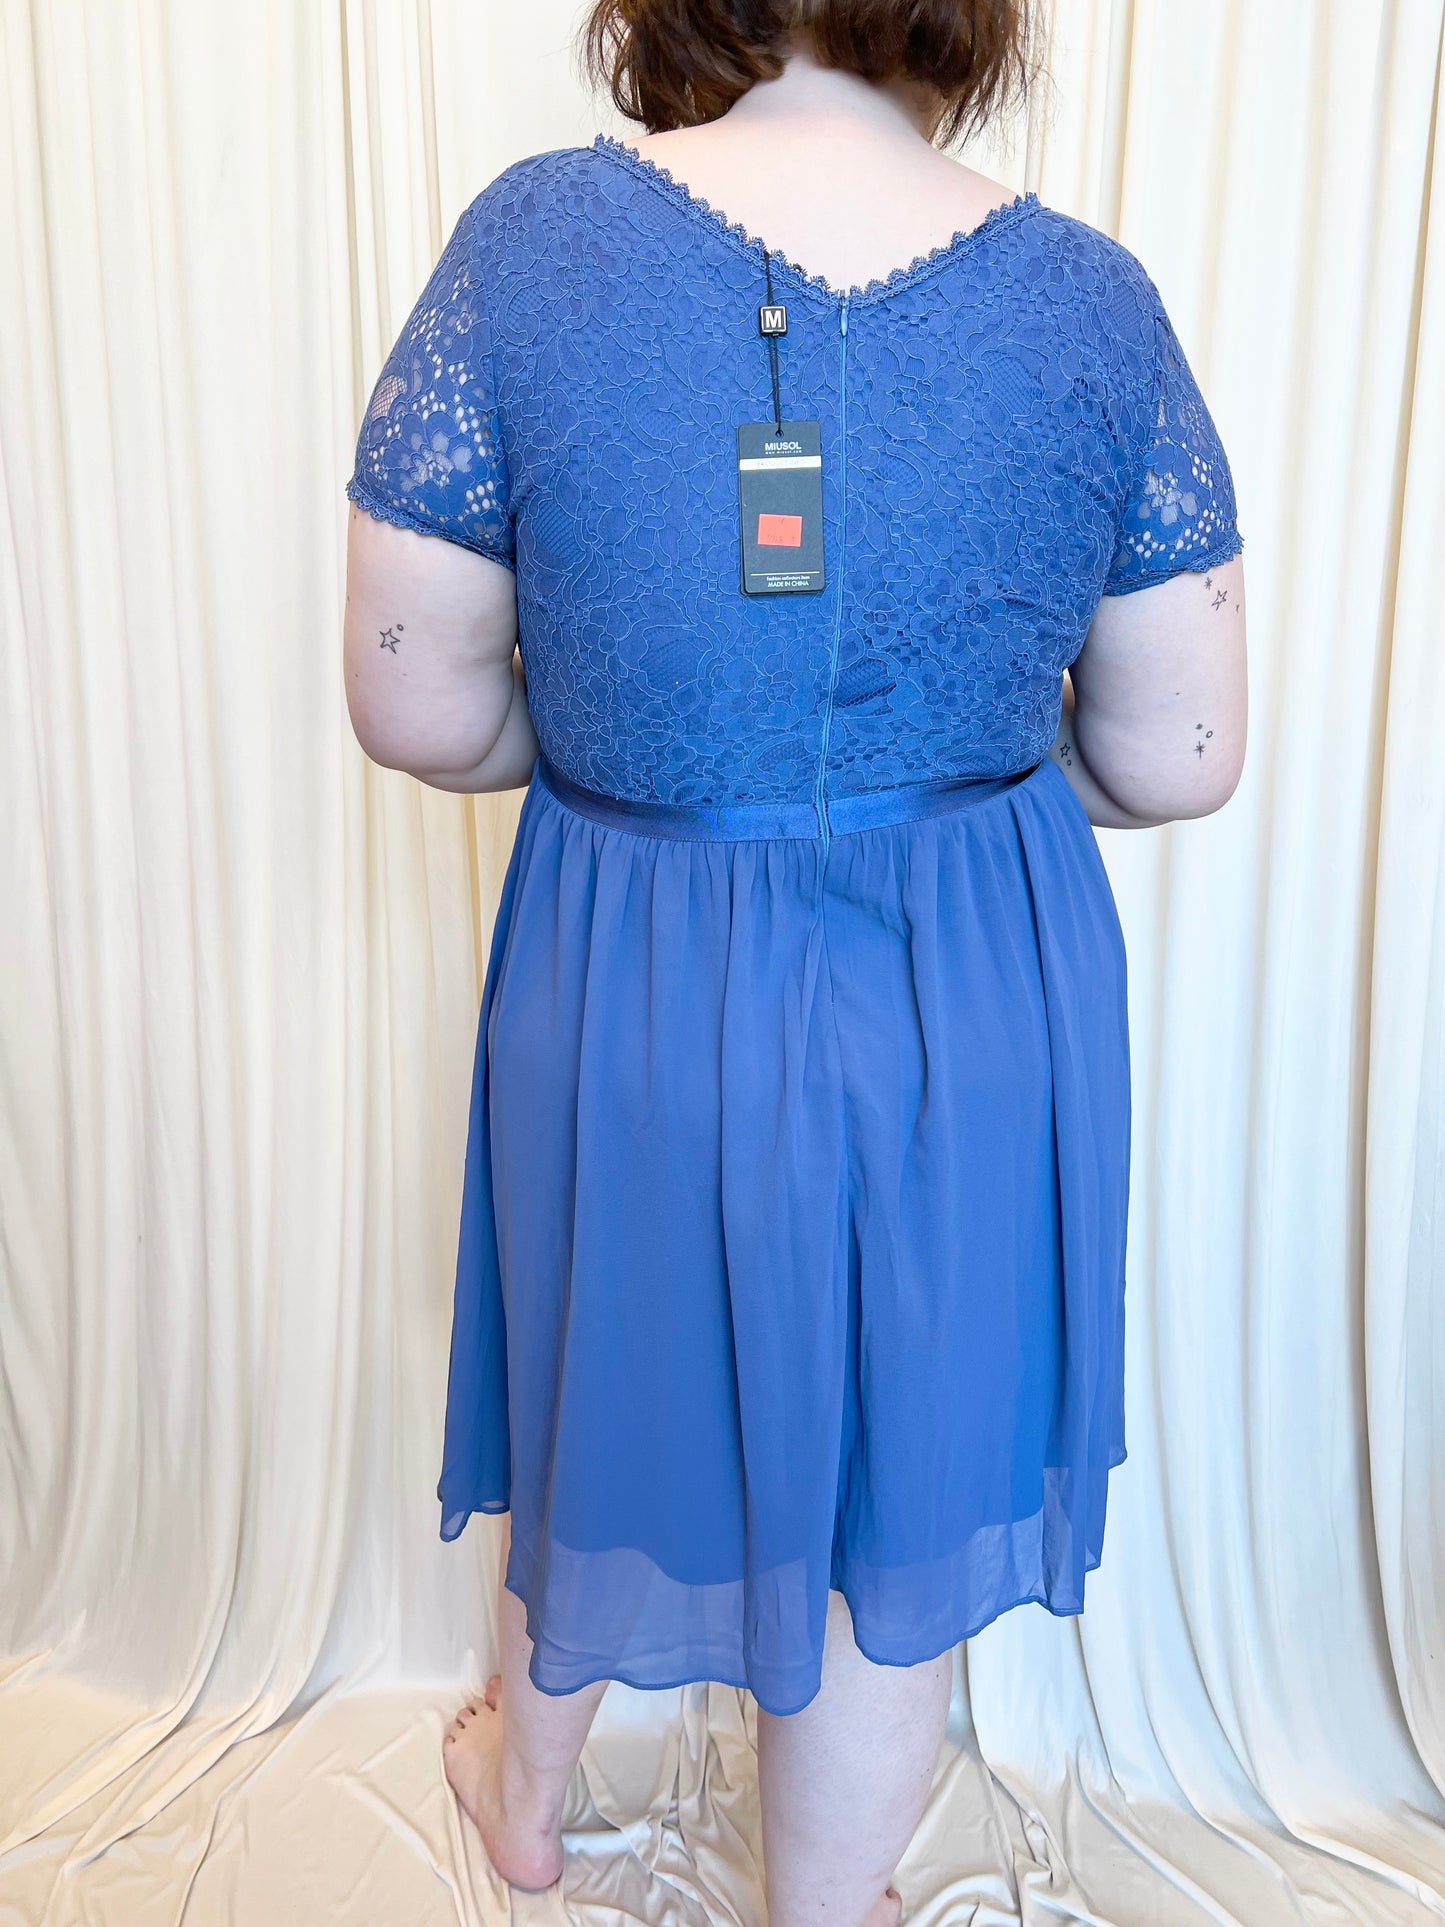 NWT Periwinkle Lace Dress - 2X-Large